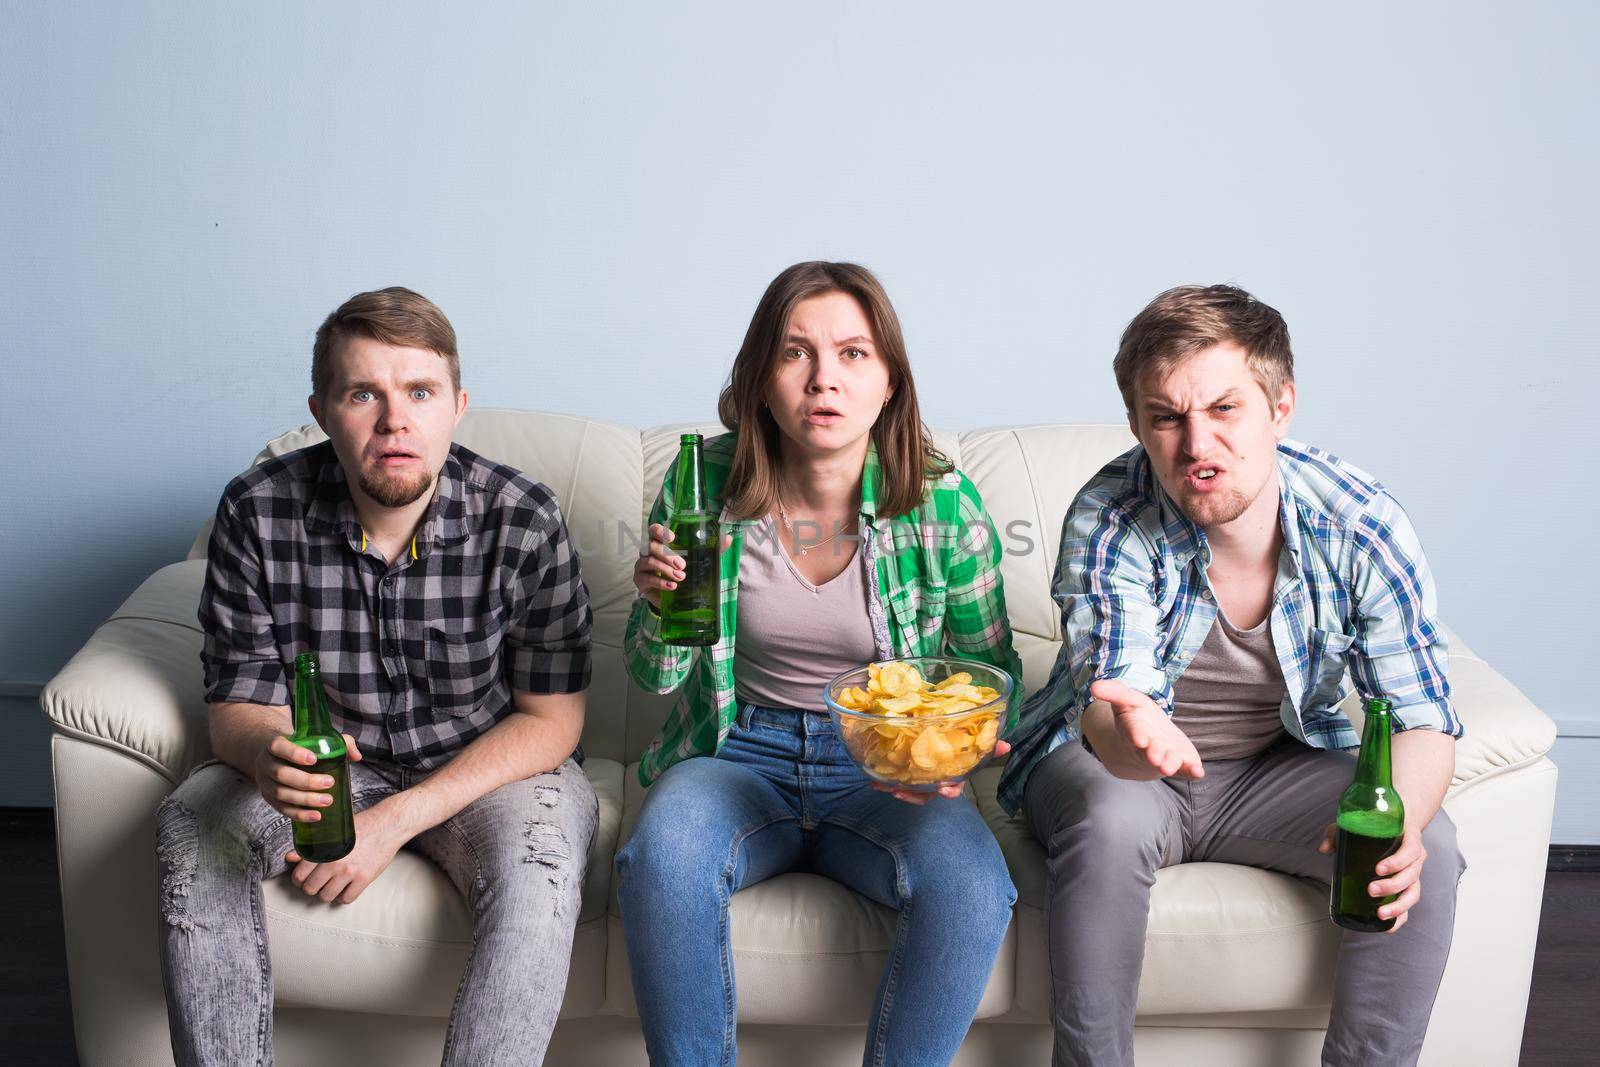 Group of friends watching sport together, Young men drink beer